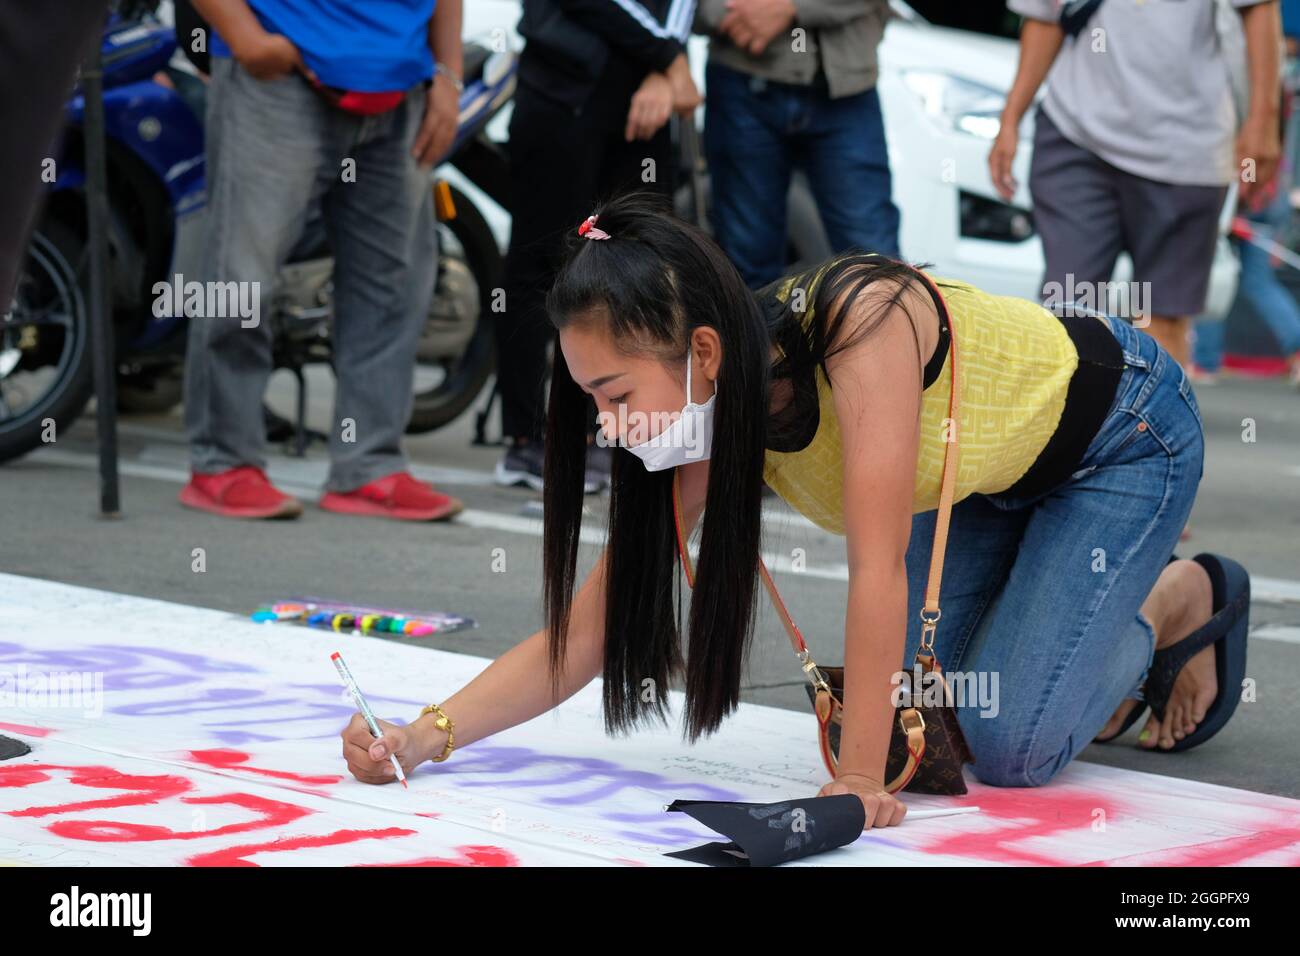 Bangkok, Thailand, 2 September 2021, a female protestor contributes to a protest banner demanding the resignation of Thailand's Prime Minister General Prayut Chan-ocha. The protest closed the north-south carriageways of the Asoke road junction in central Bangkok, and restricted traffic along the Sukhumvit Road. Today's event was part of an on-going series of protests across the country to voice disaffection with the current government's performance during the COVID pandemic. Stock Photo